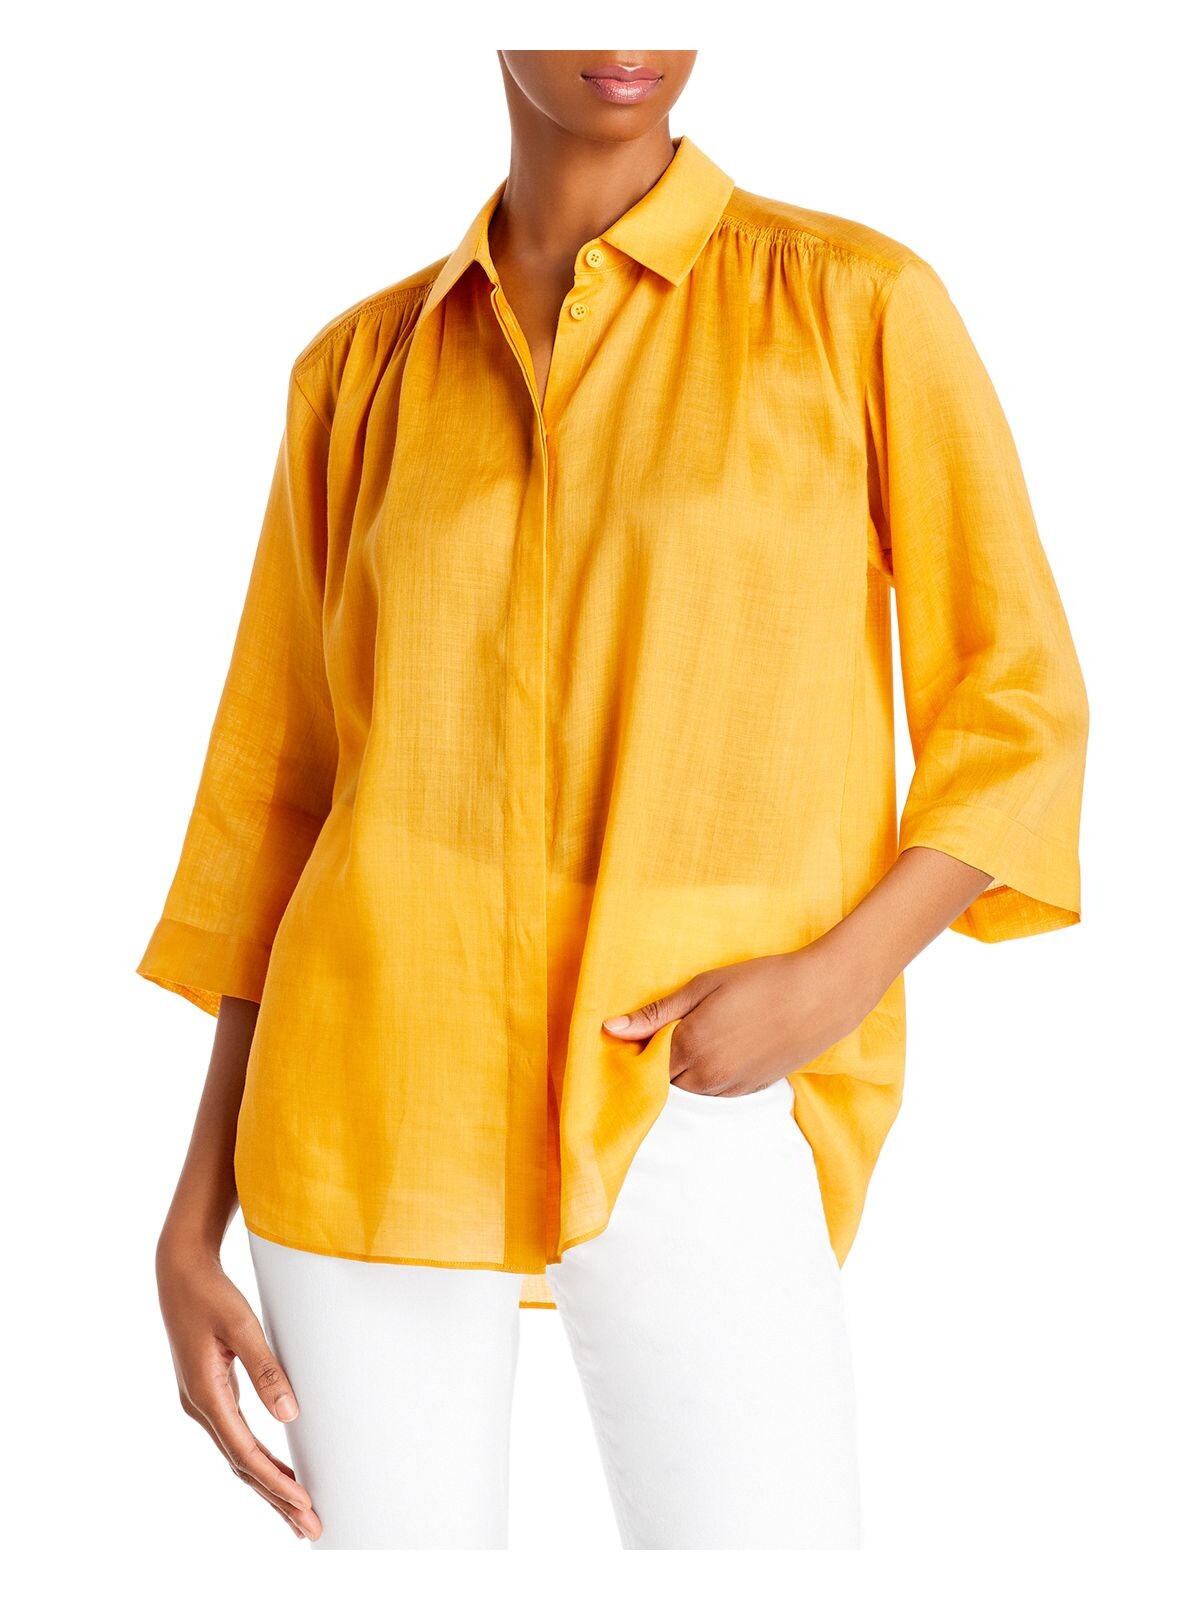 LAFAYETTE 148 NEW YORK Womens Orange 3/4 Sleeve Collared Button Up Top XS